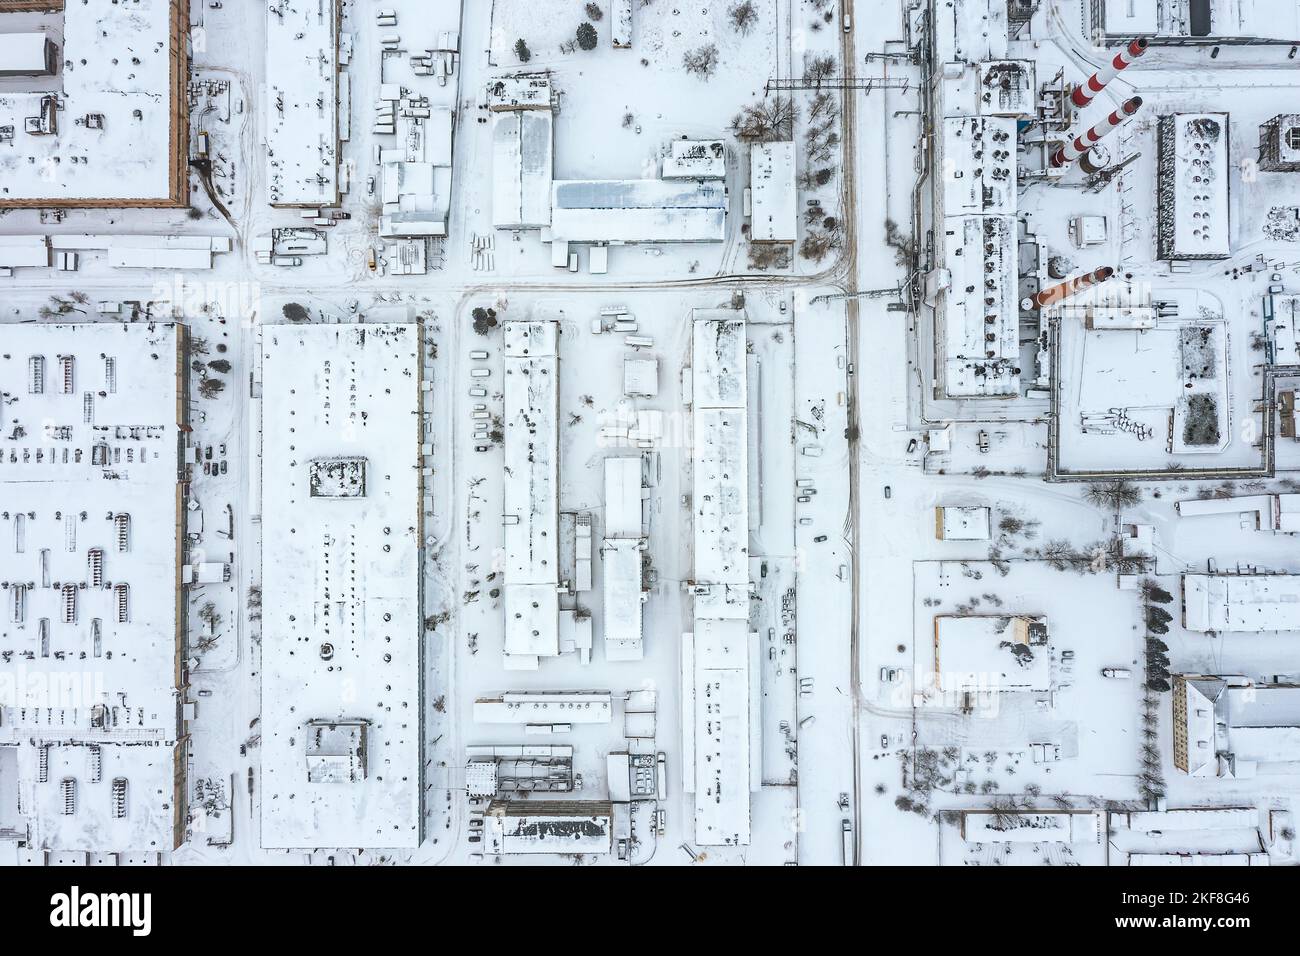 urban industrial area with manufacturing buildings, warehouses and thermal power plant at winter time. aerial top view. Stock Photo